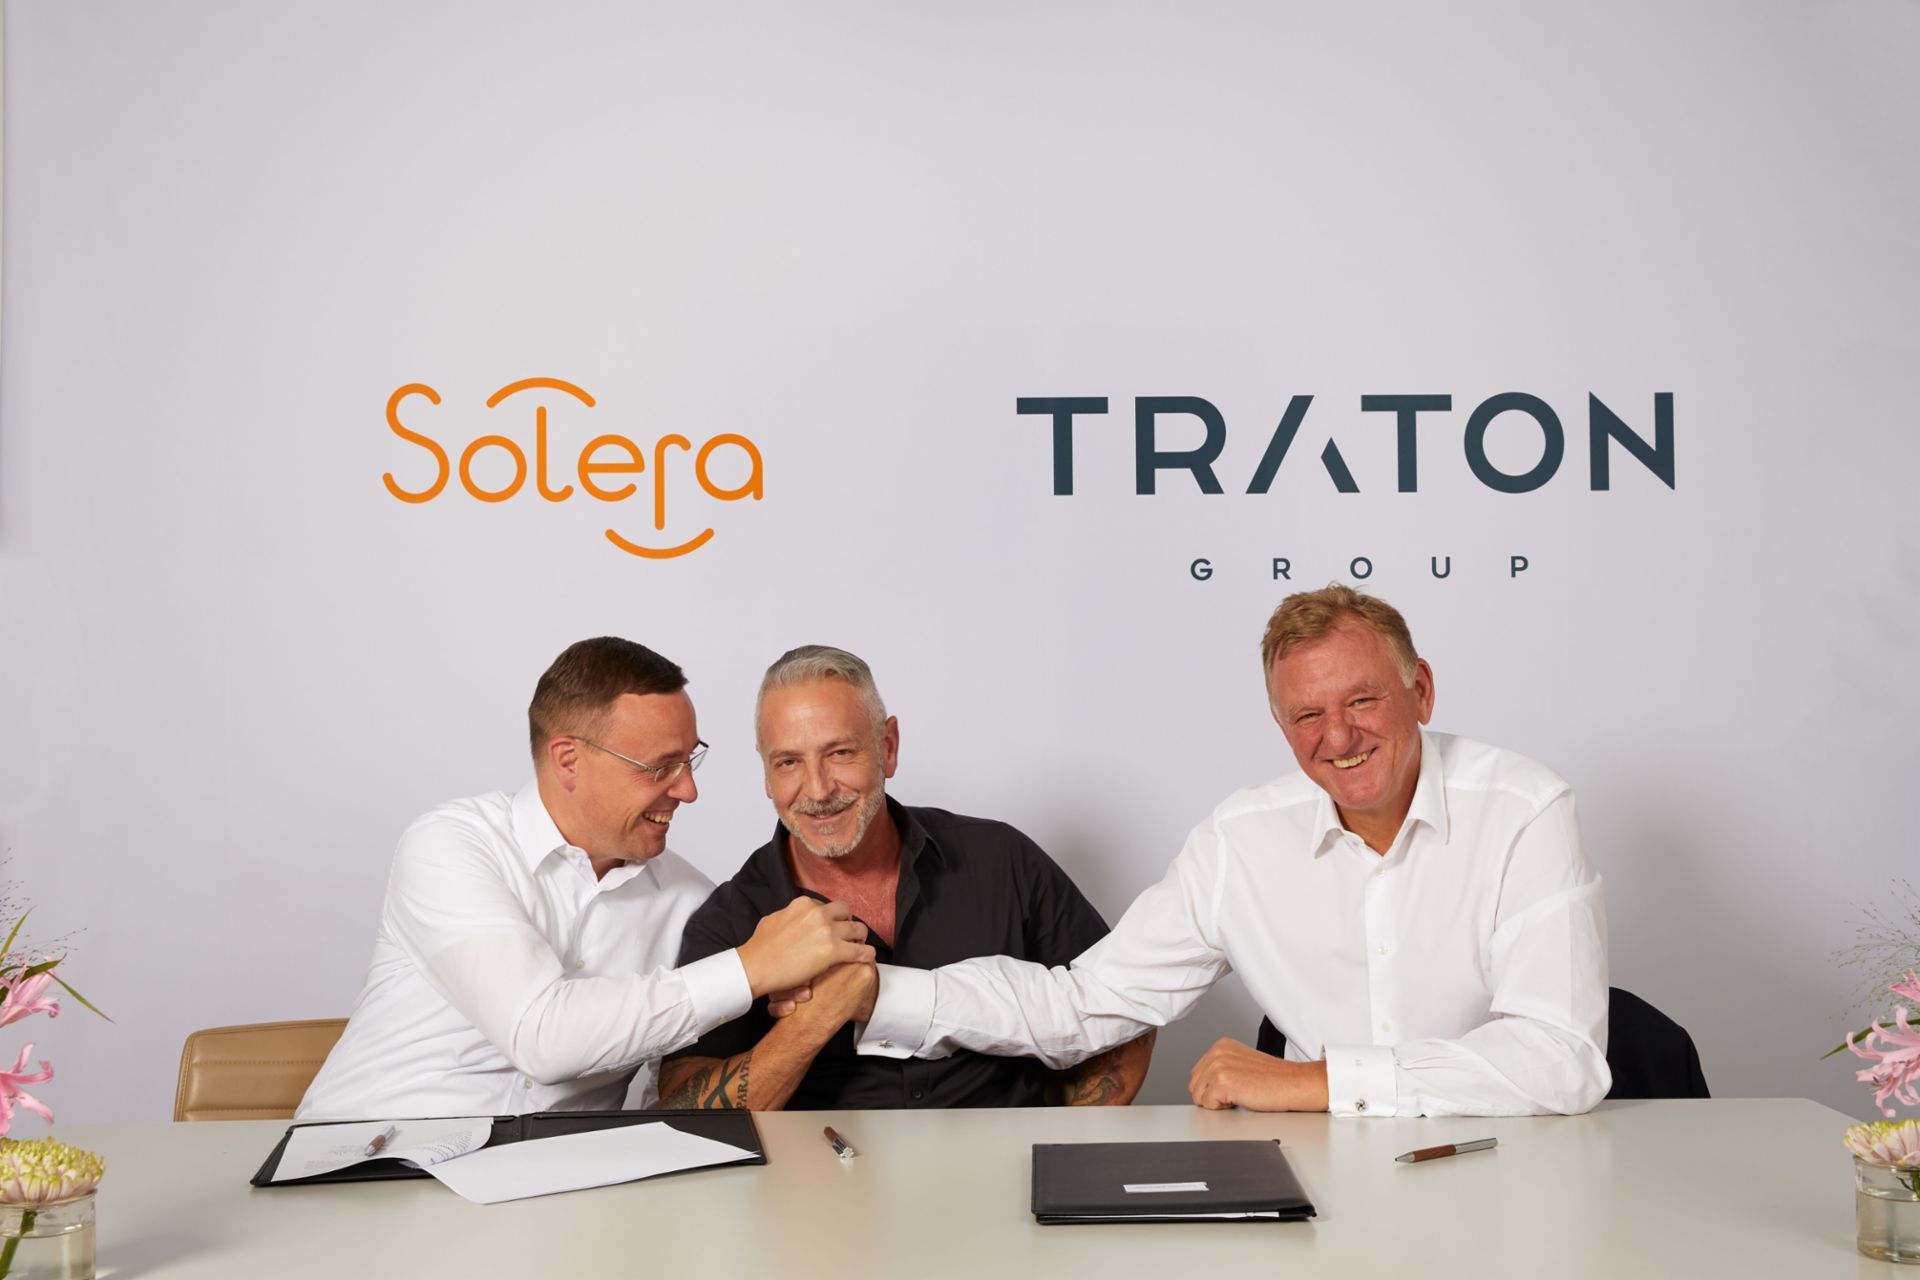 (left to right)
Christian Schulz, Chief Financial Officer of TRATON AG
Tony Aquila, founder, Chairman and Chief Executive Officer of Solera Holdings, Inc.
Andreas Renschler, Chief Executive Officer of TRATON AG and member of the Board of Management of Volkswagen AG